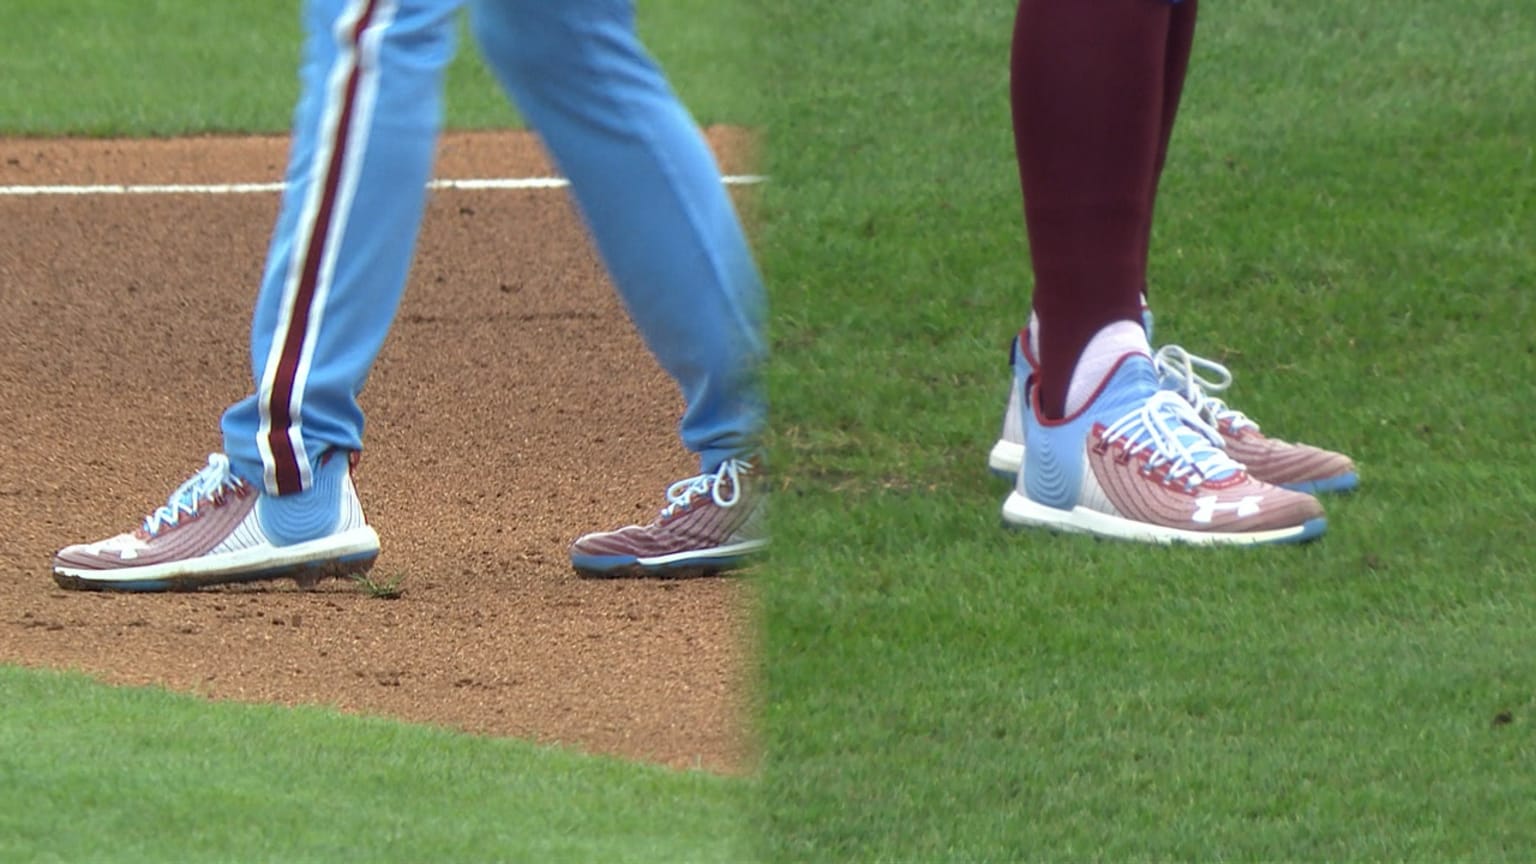 Bryce Harper gives Bohm cleats, 08/13/2020